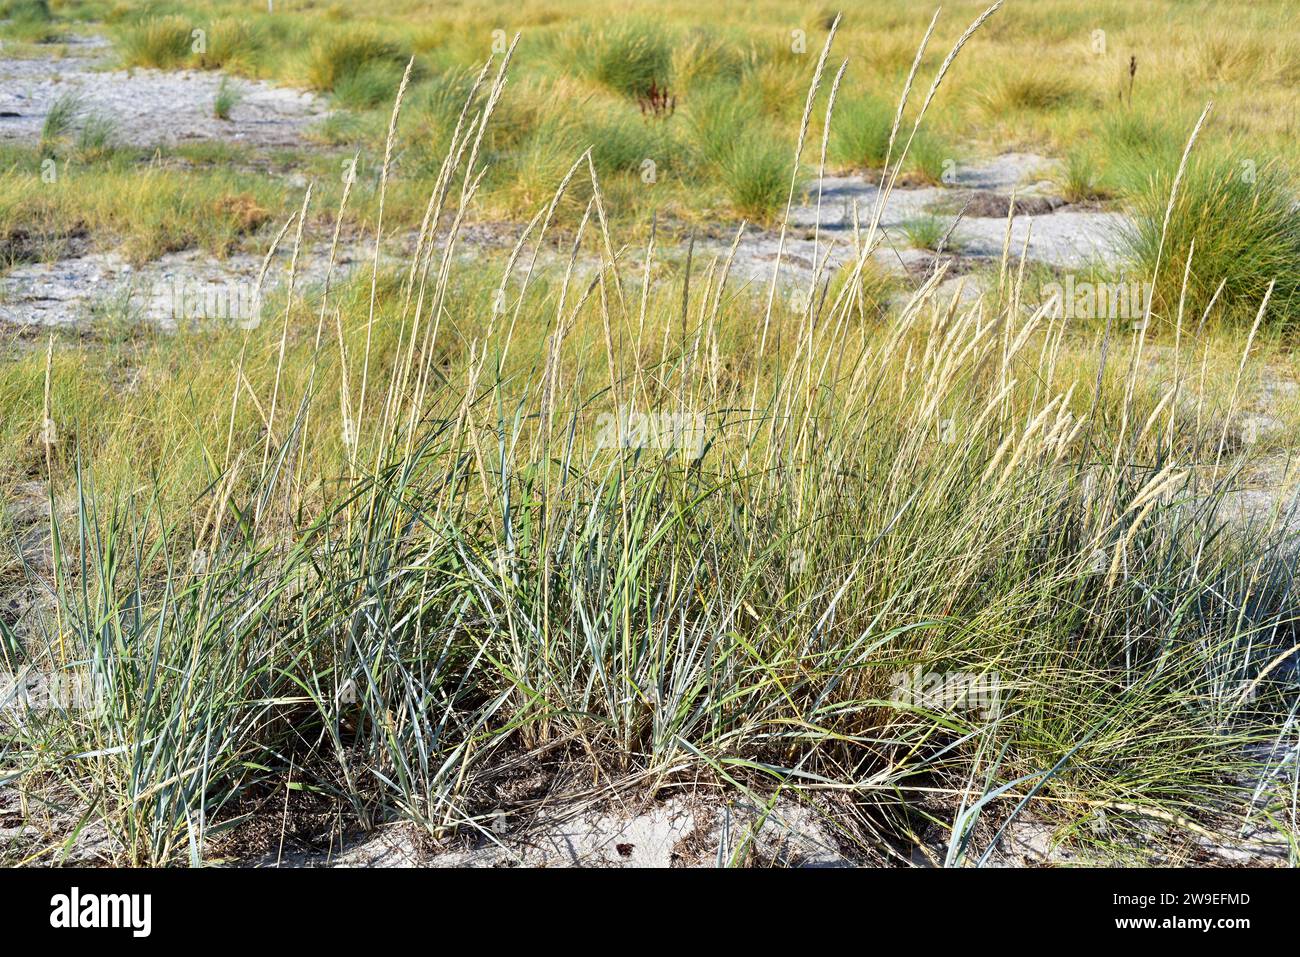 Blue lyme grass or sea lyme grass (Leymus arenarius or Elymus arenarius) is a perennial herb native to west north Europe. Back Ammophila arenaria. Thi Stock Photo